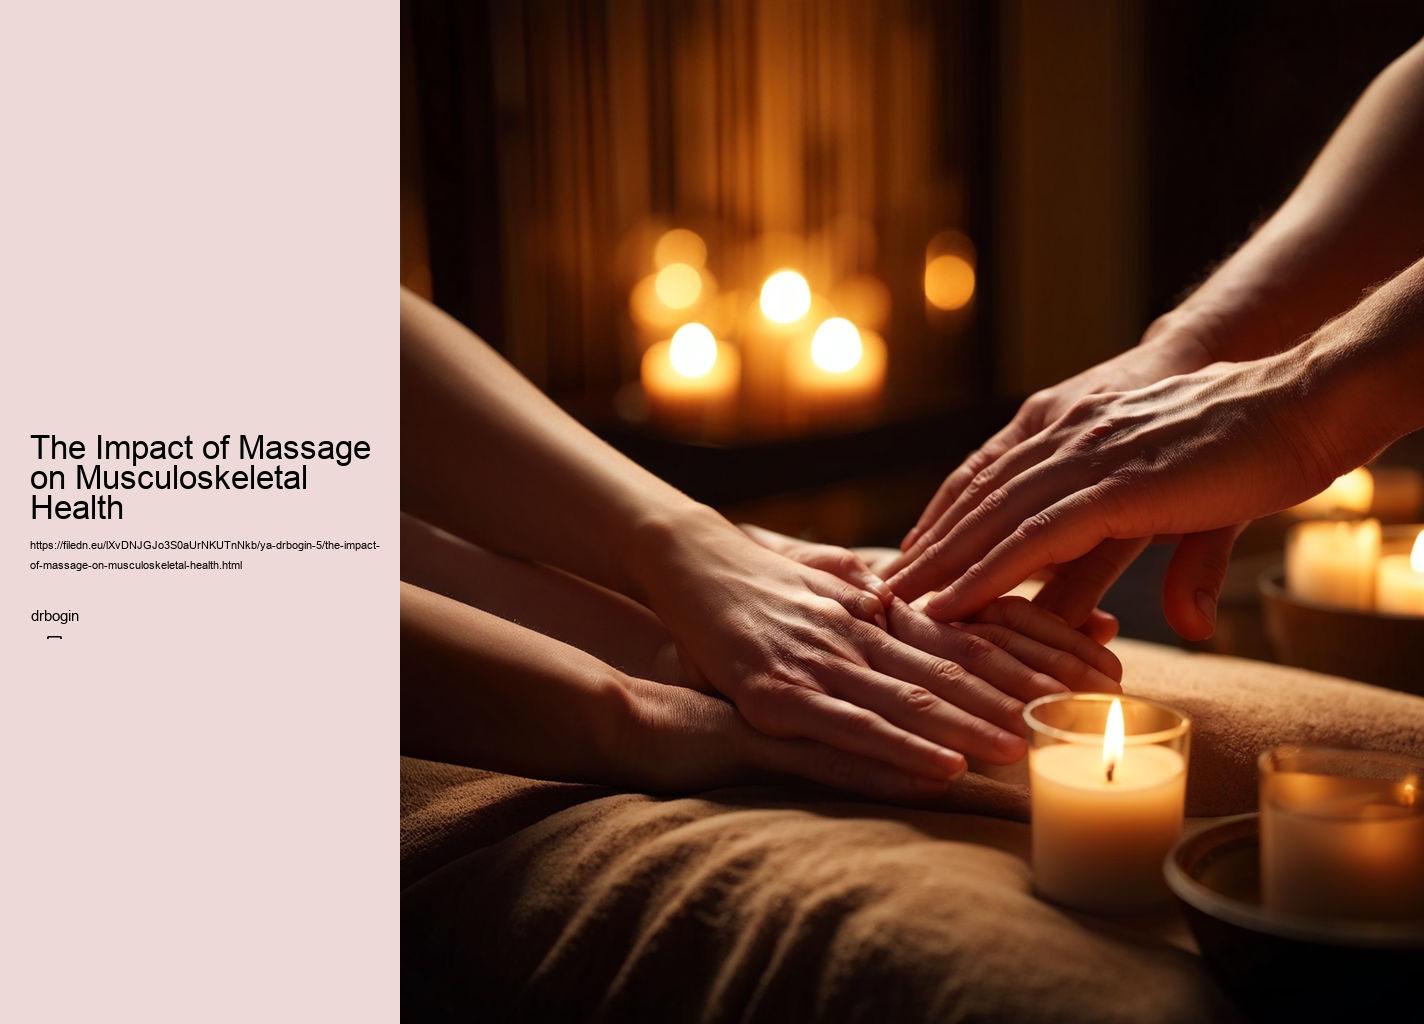 The Impact of Massage on Musculoskeletal Health